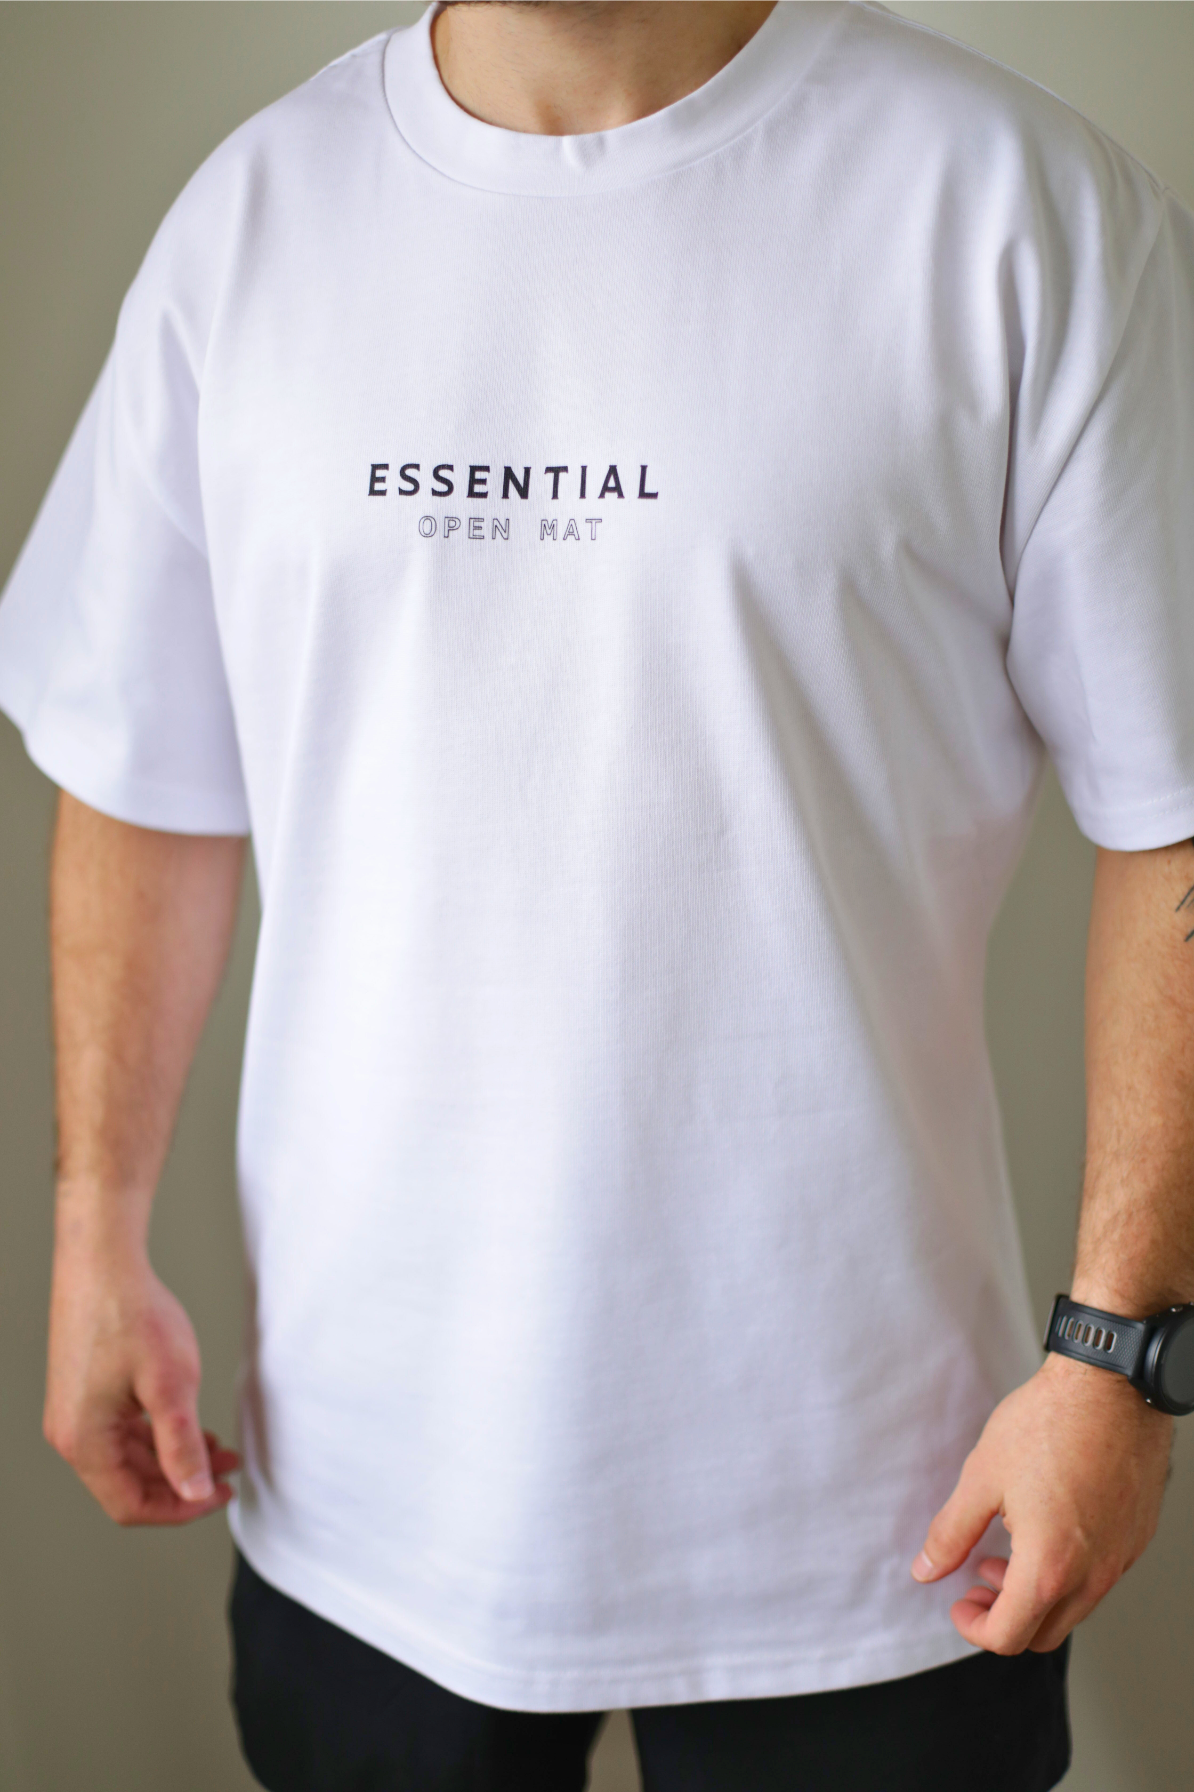 Model wearing the Open Mat Essential white t-shirt by Just Roll Threads, front view, featuring breathable fabric ideal for intense BJJ training sessions and everyday wear. Perfect for Brazilian Jiu-Jitsu (BJJ) training, competitions, and casual wear.